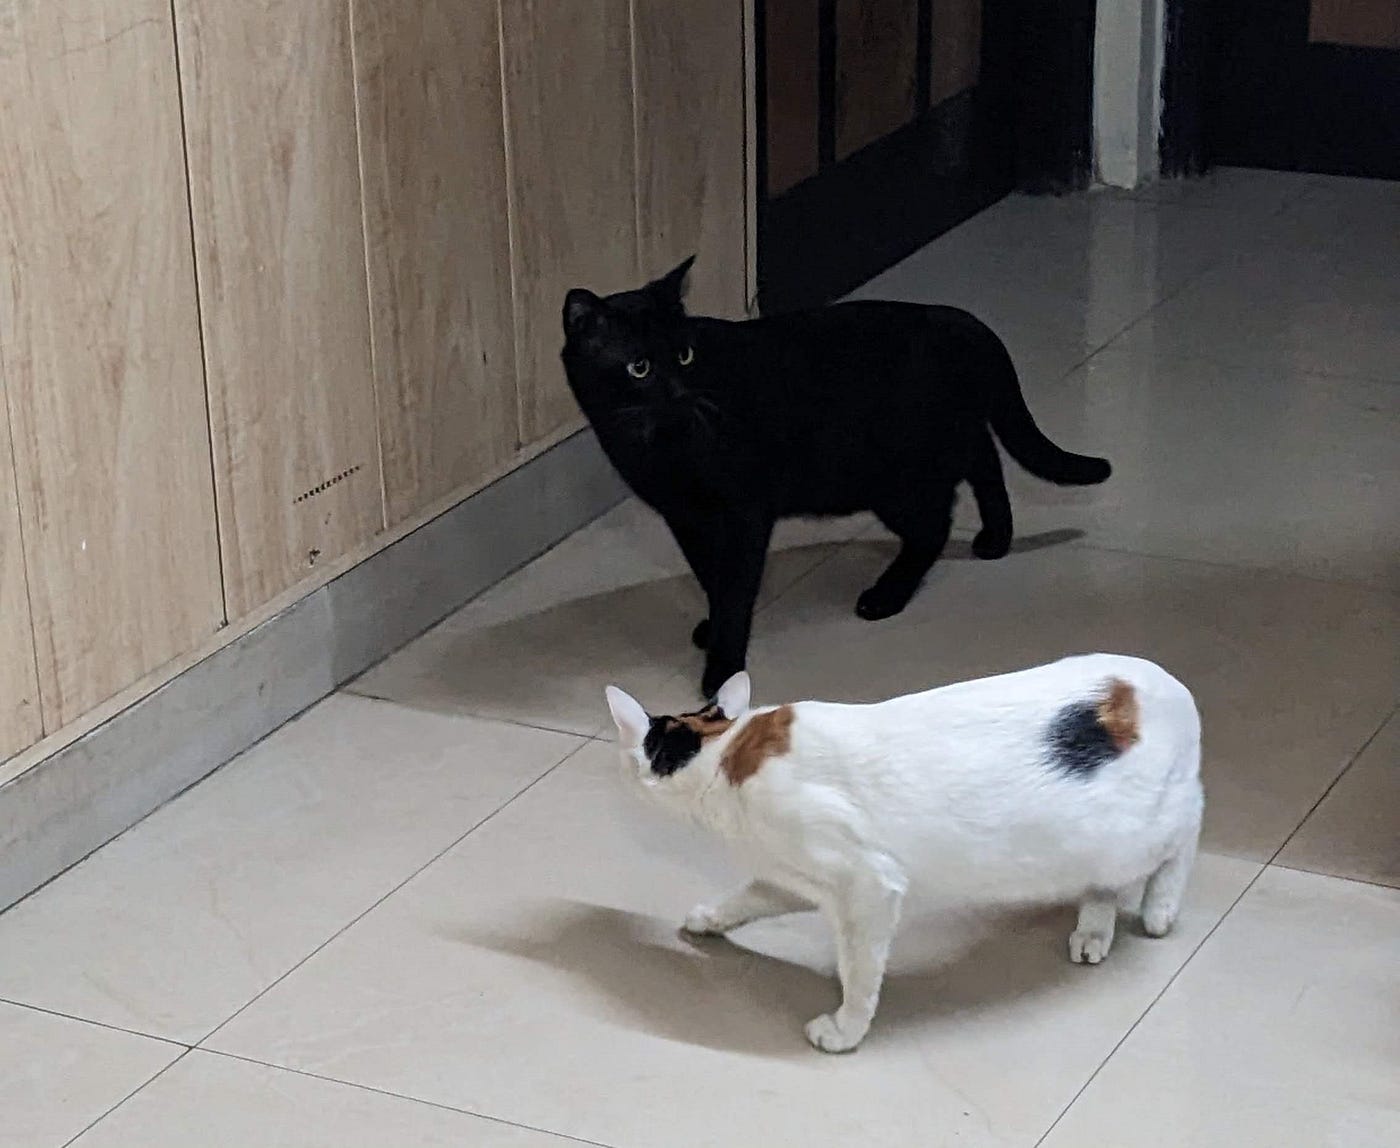 Meet my cat friends. How I became friends with many cats…, by Soumya Gupta